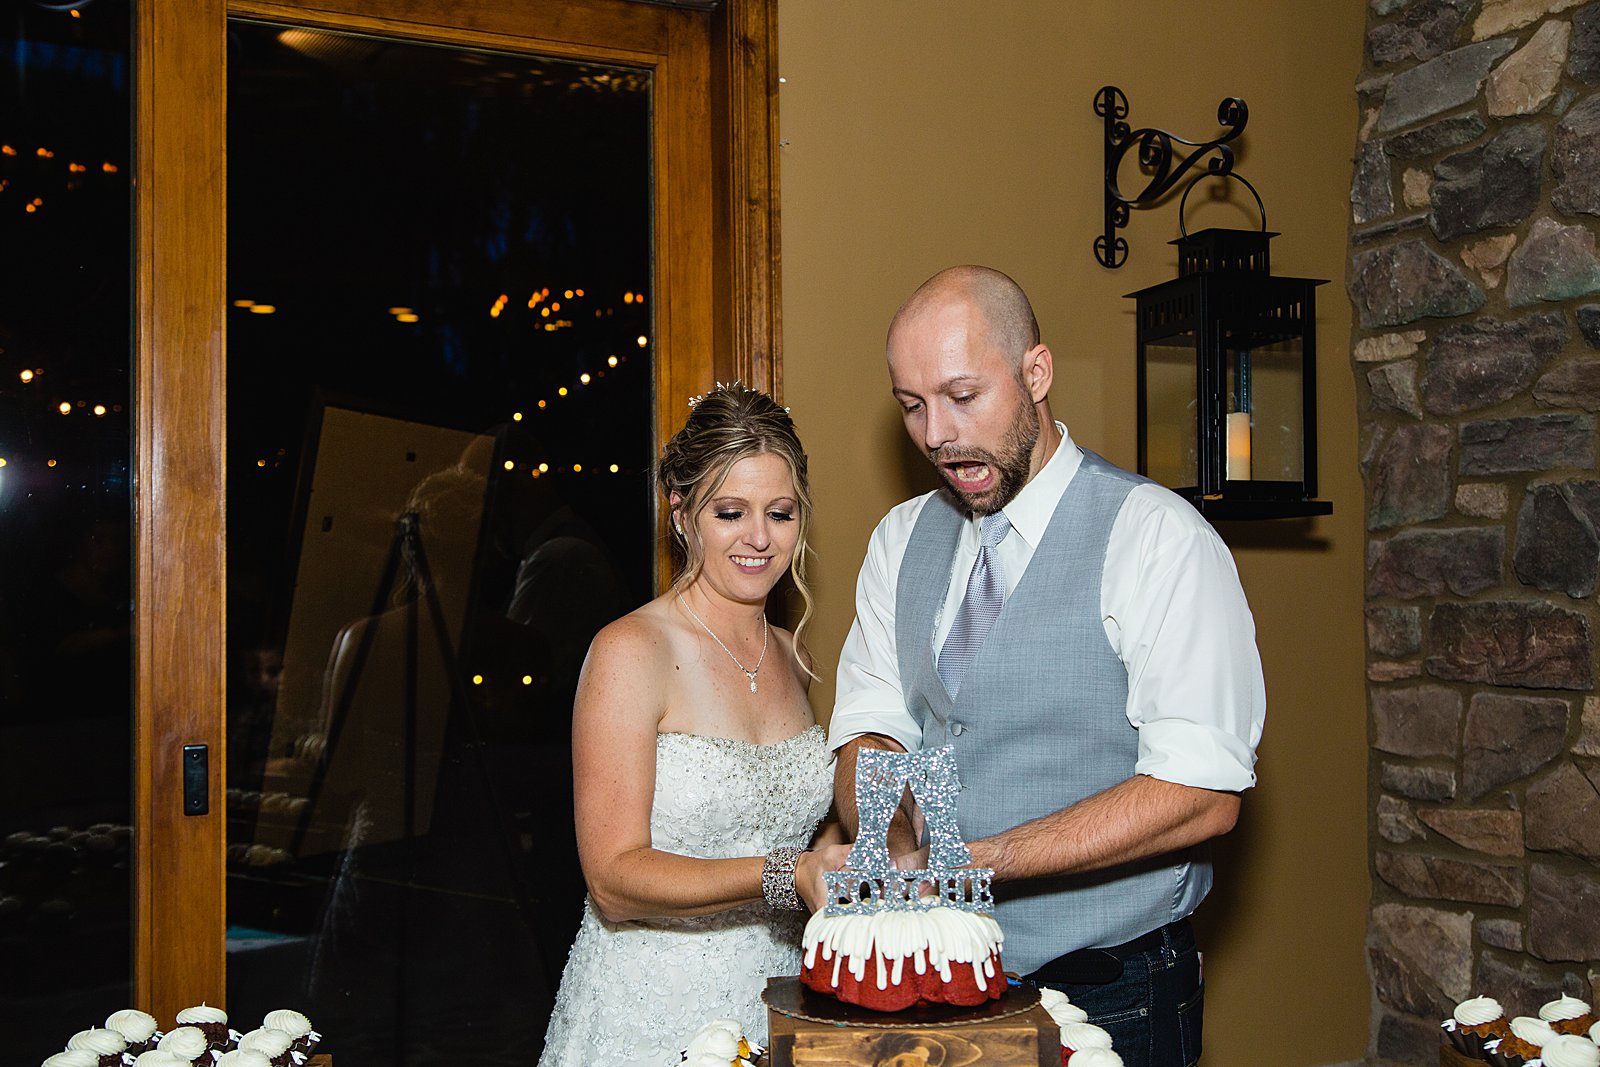 Bride and Groom cutting their wedding cake at their The Windmill House wedding reception by Arizona wedding photographer PMA Photography.